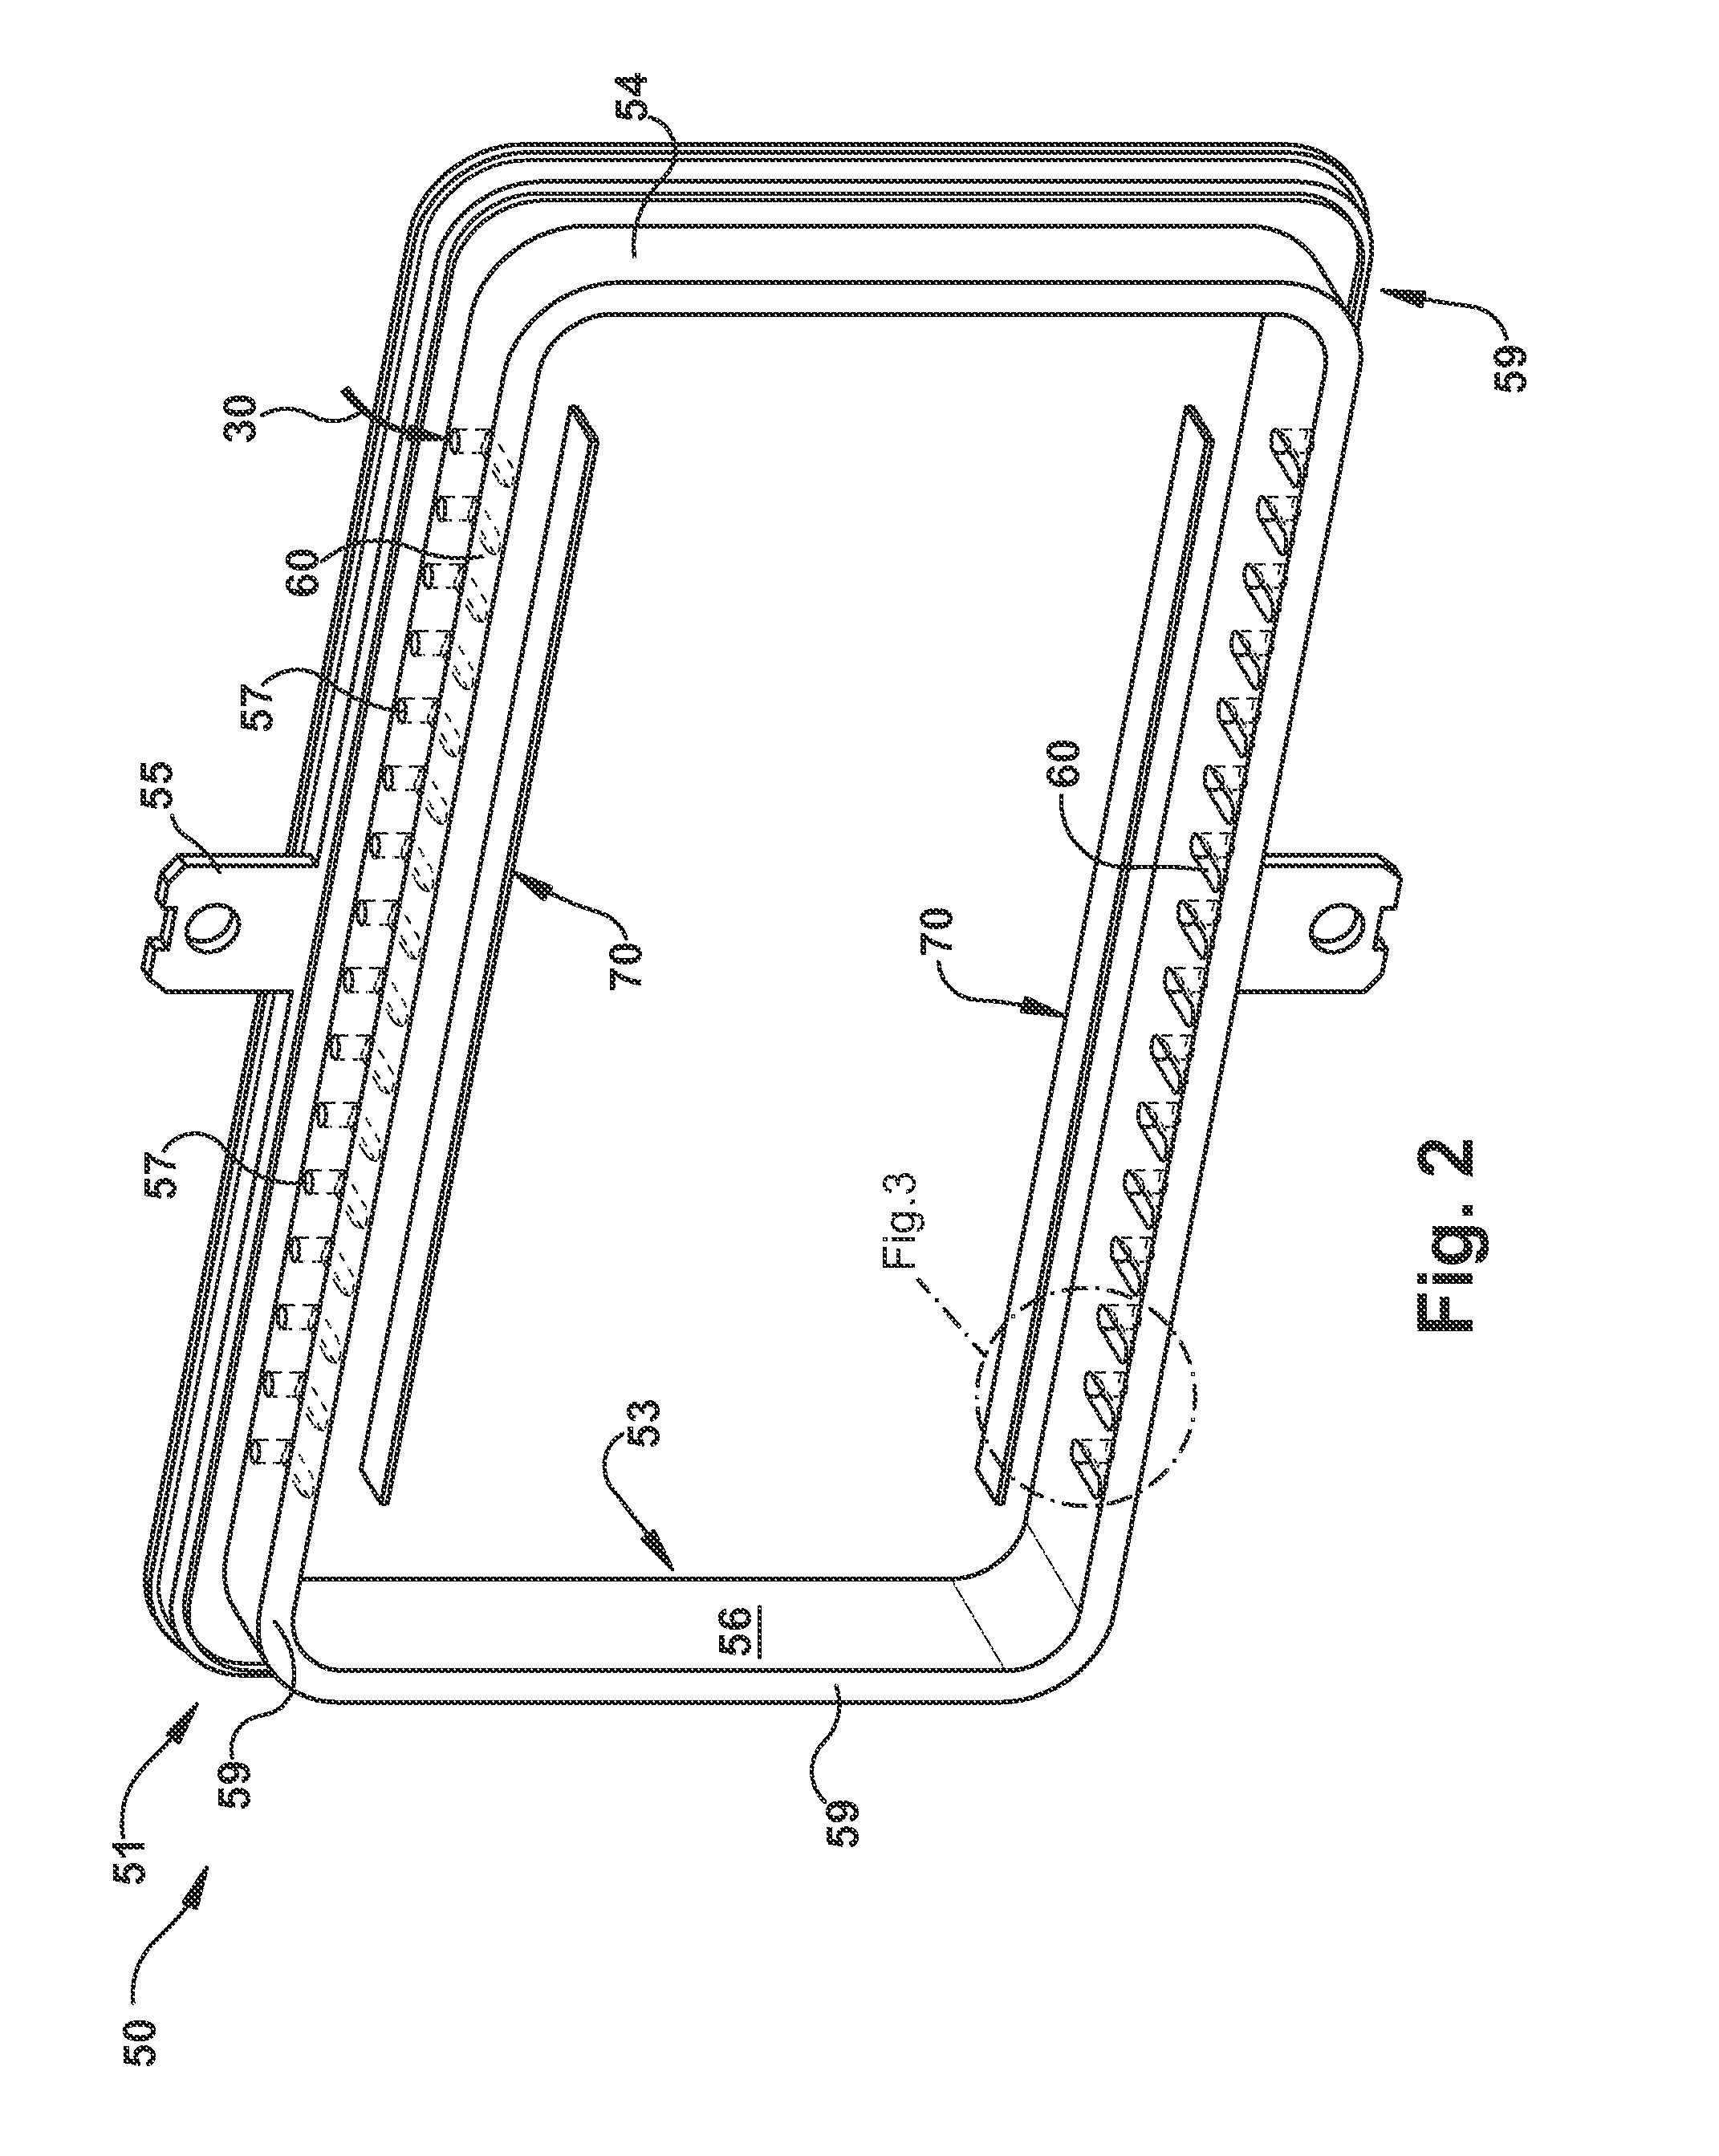 Gas turbine transition piece aft frame assemblies with cooling channels and methods for manufacturing the same